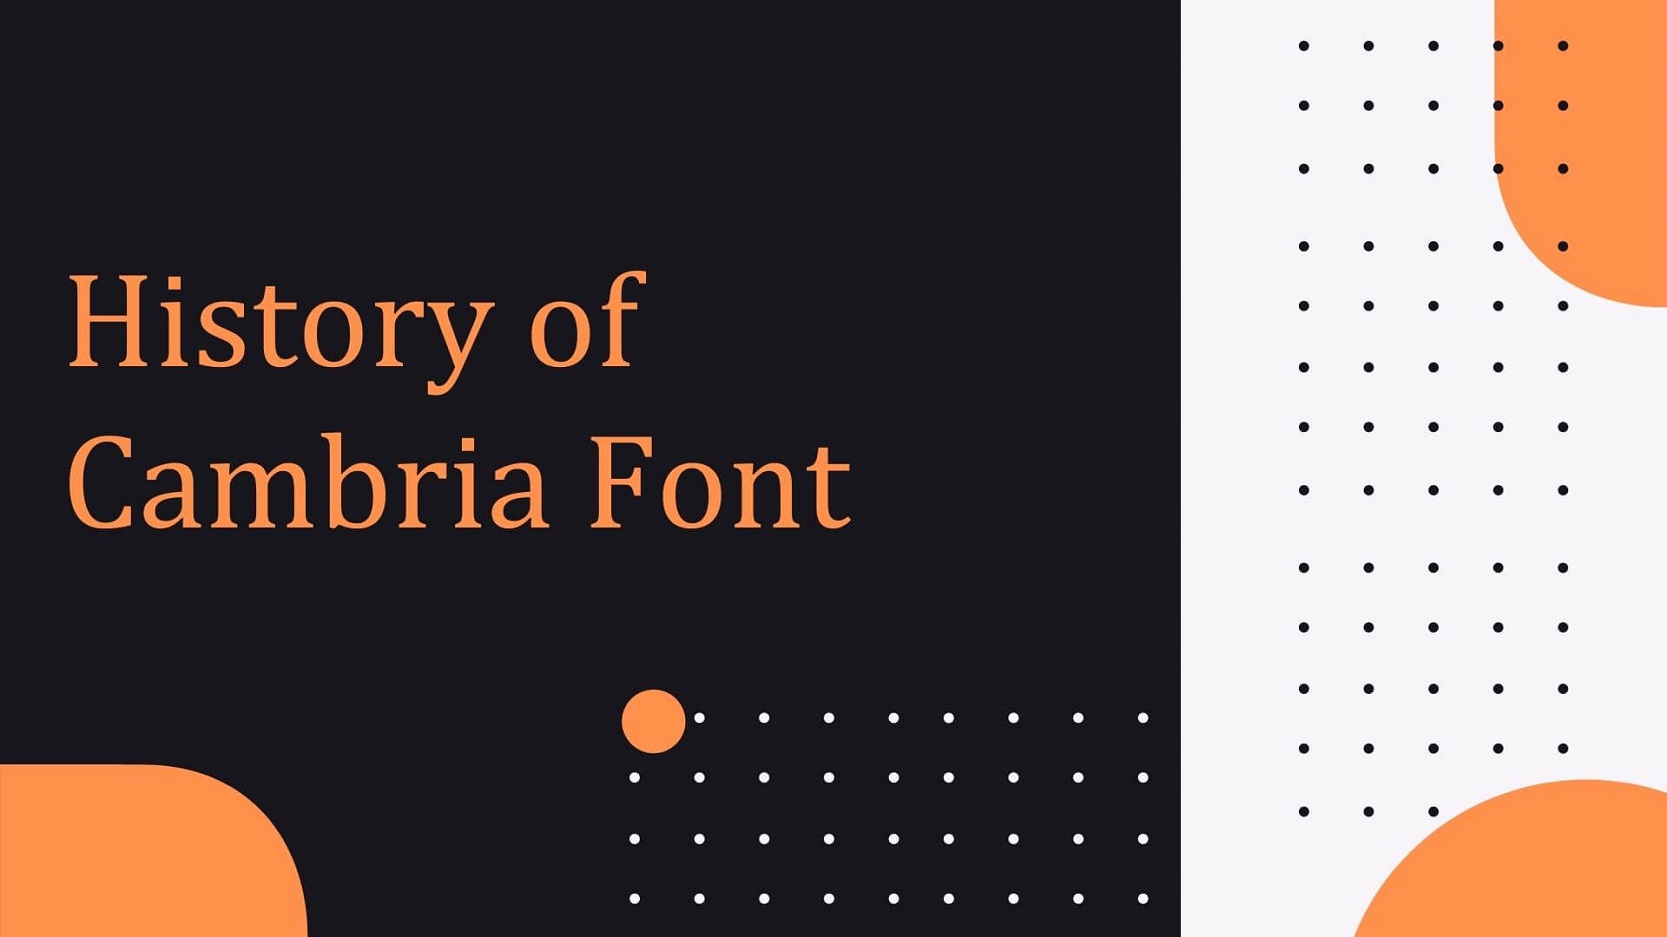 History of Cambria Font